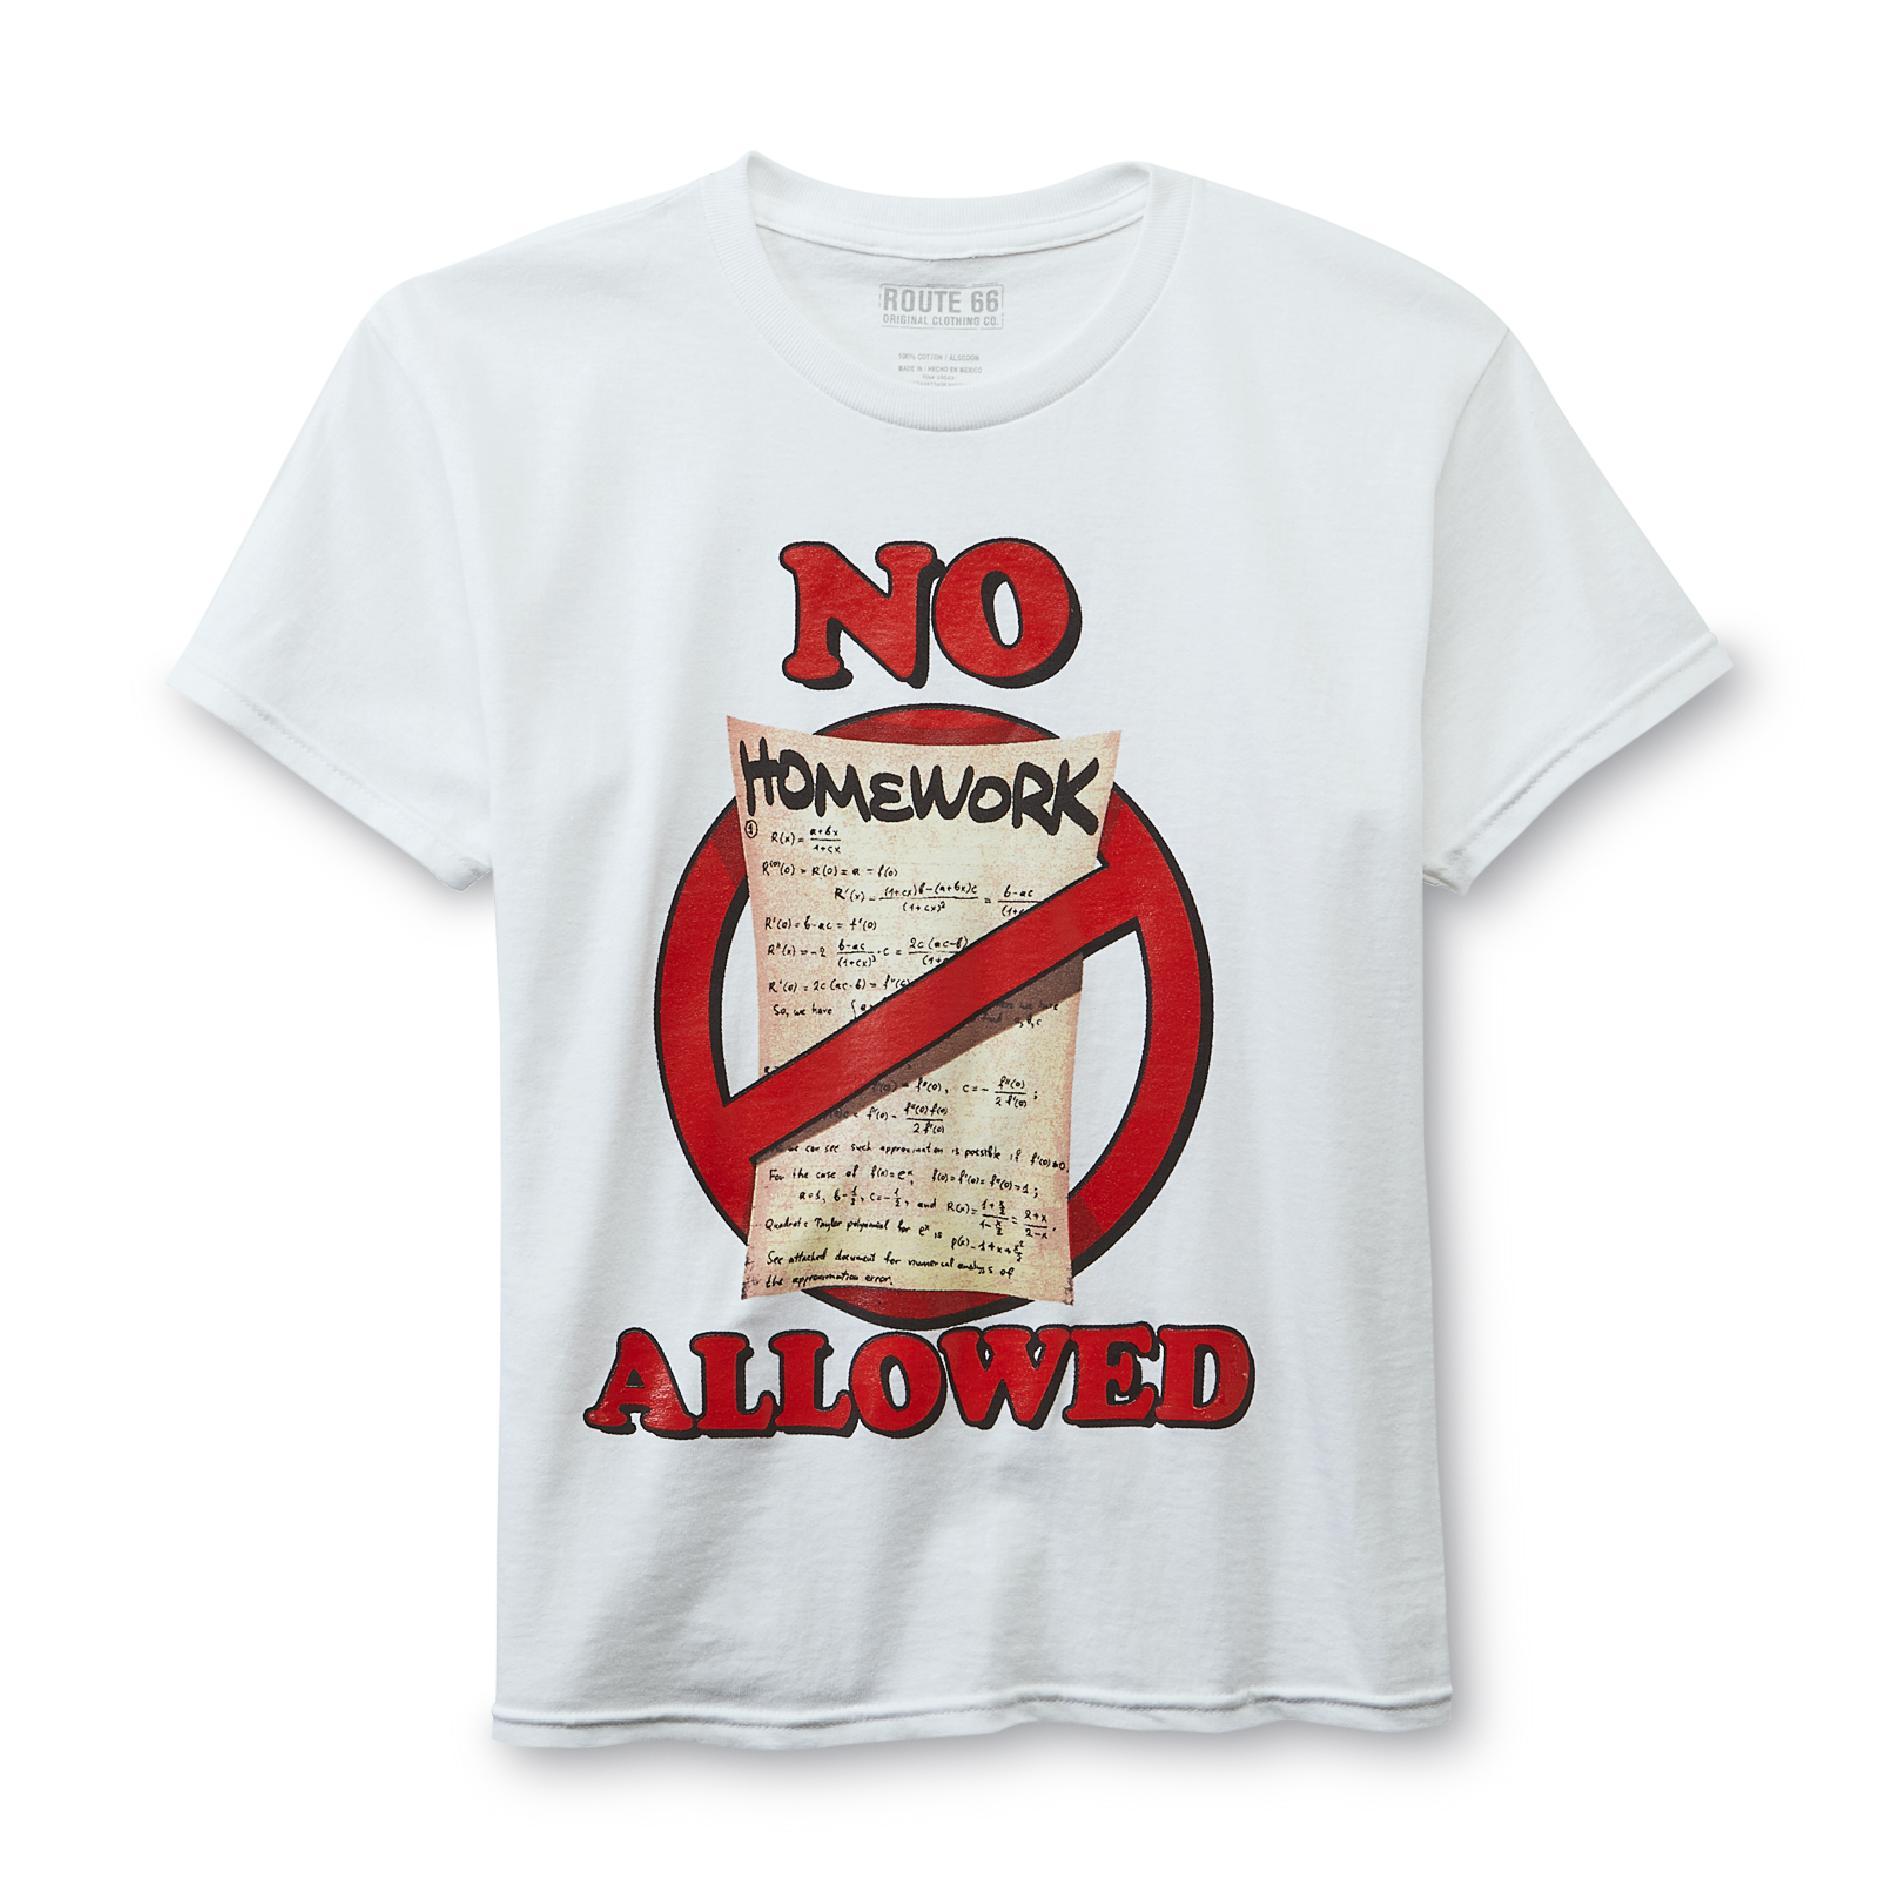 Route 66 Boy's Graphic T-Shirt - No Homework Allowed